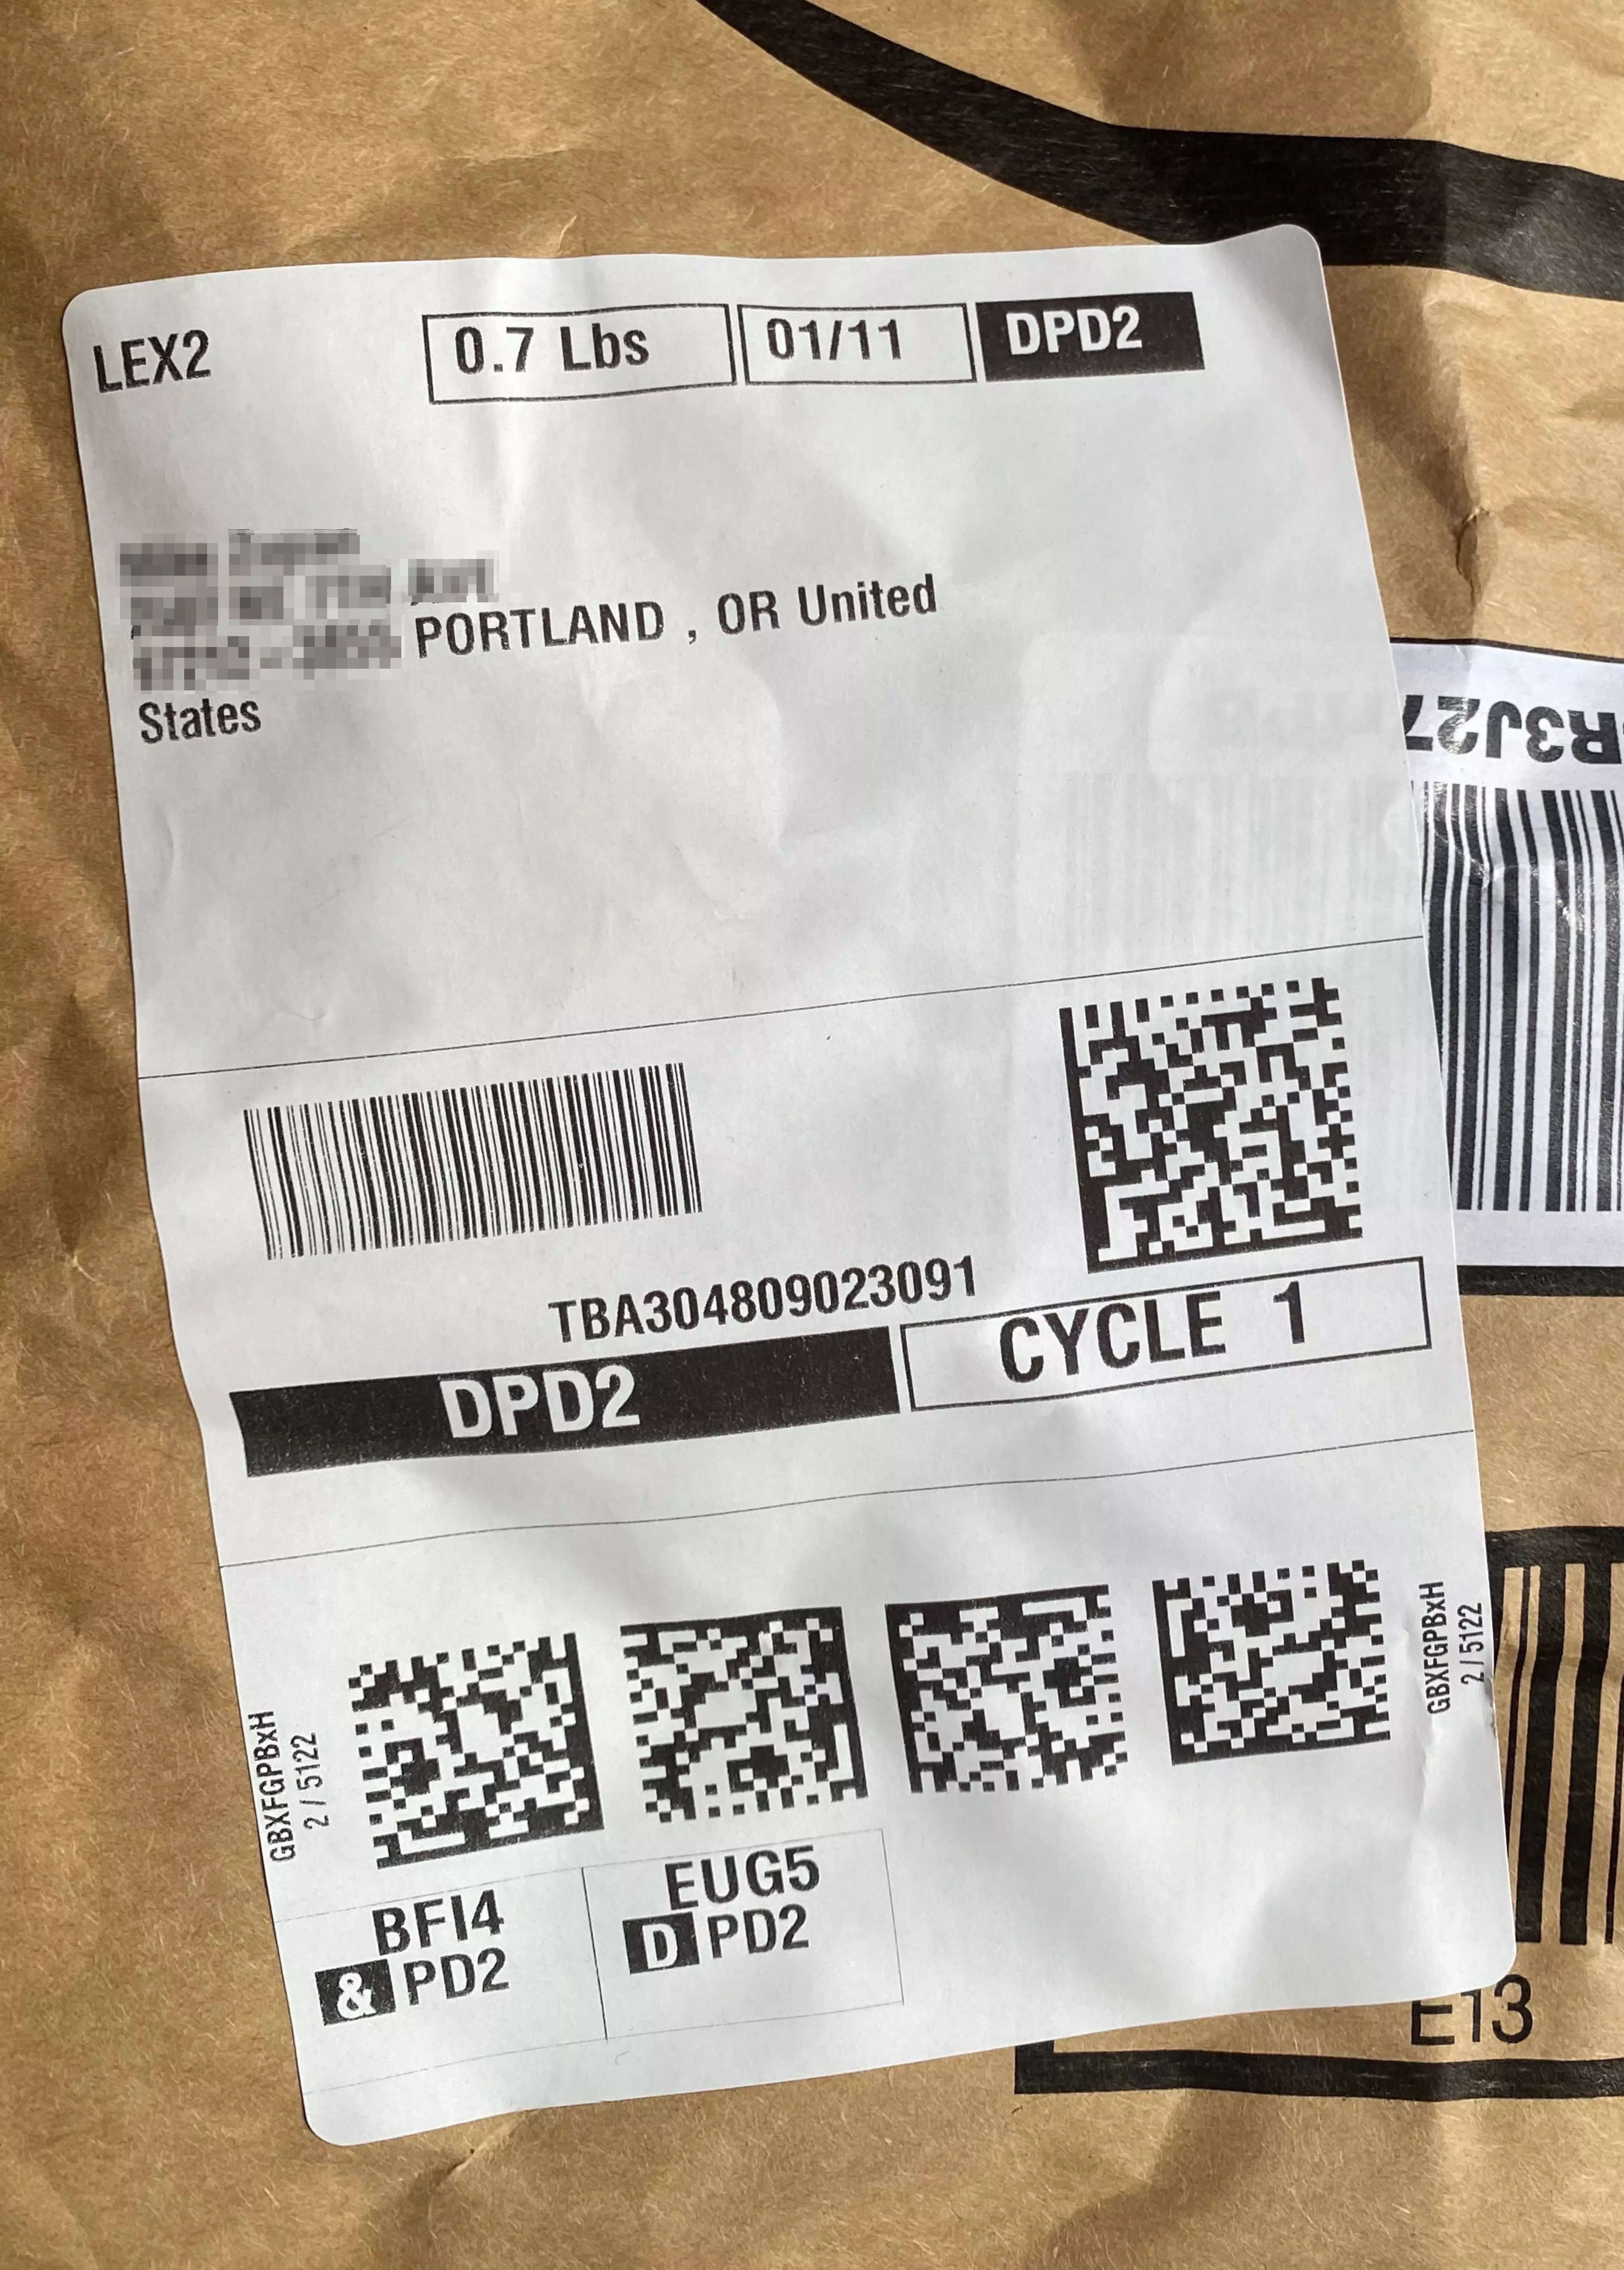 An Amazon package shipping label